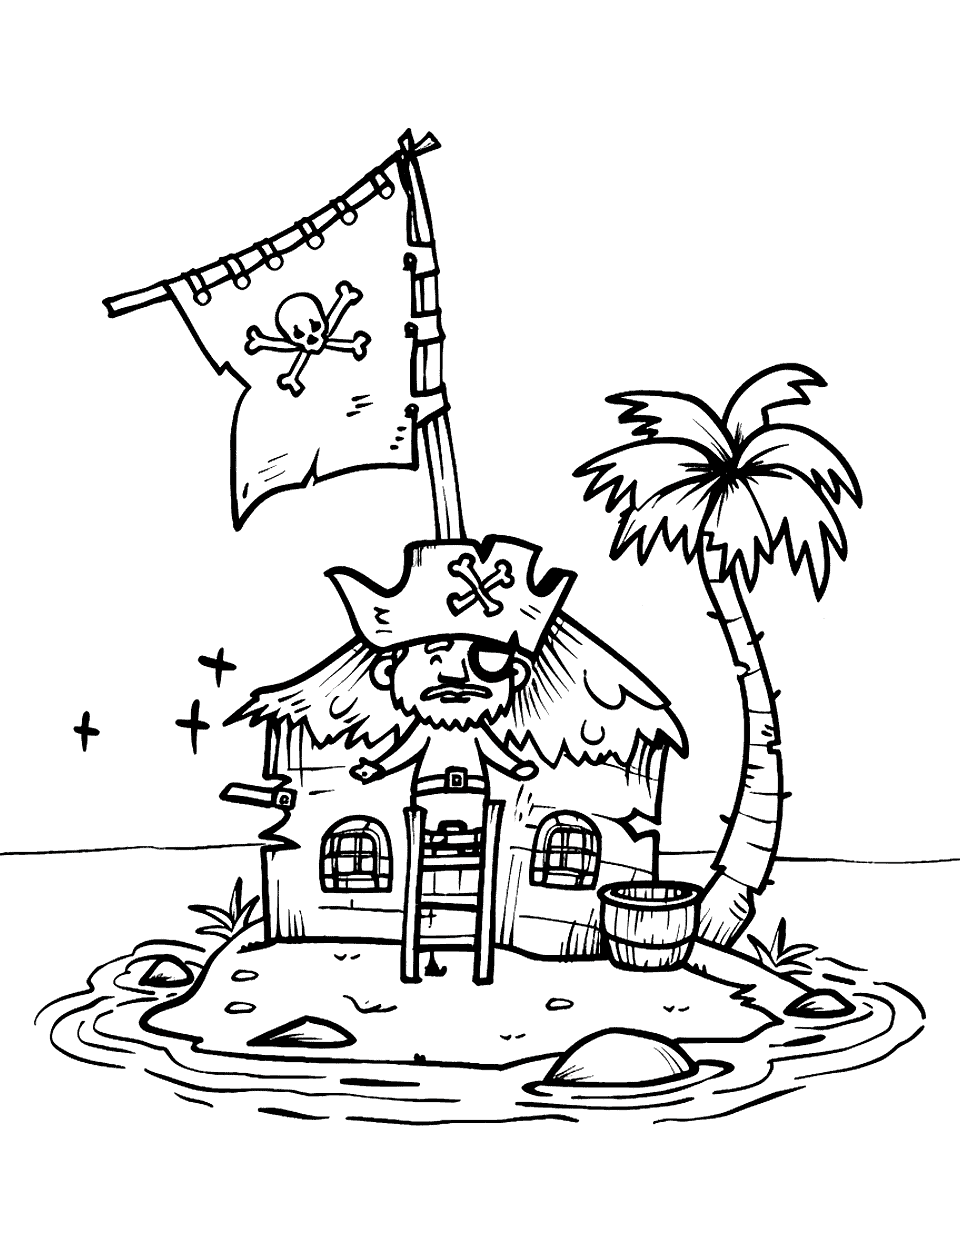 Desert Island Survival Pirate Coloring Page - A pirate crafting a shelter on a small, palm-fringed island.